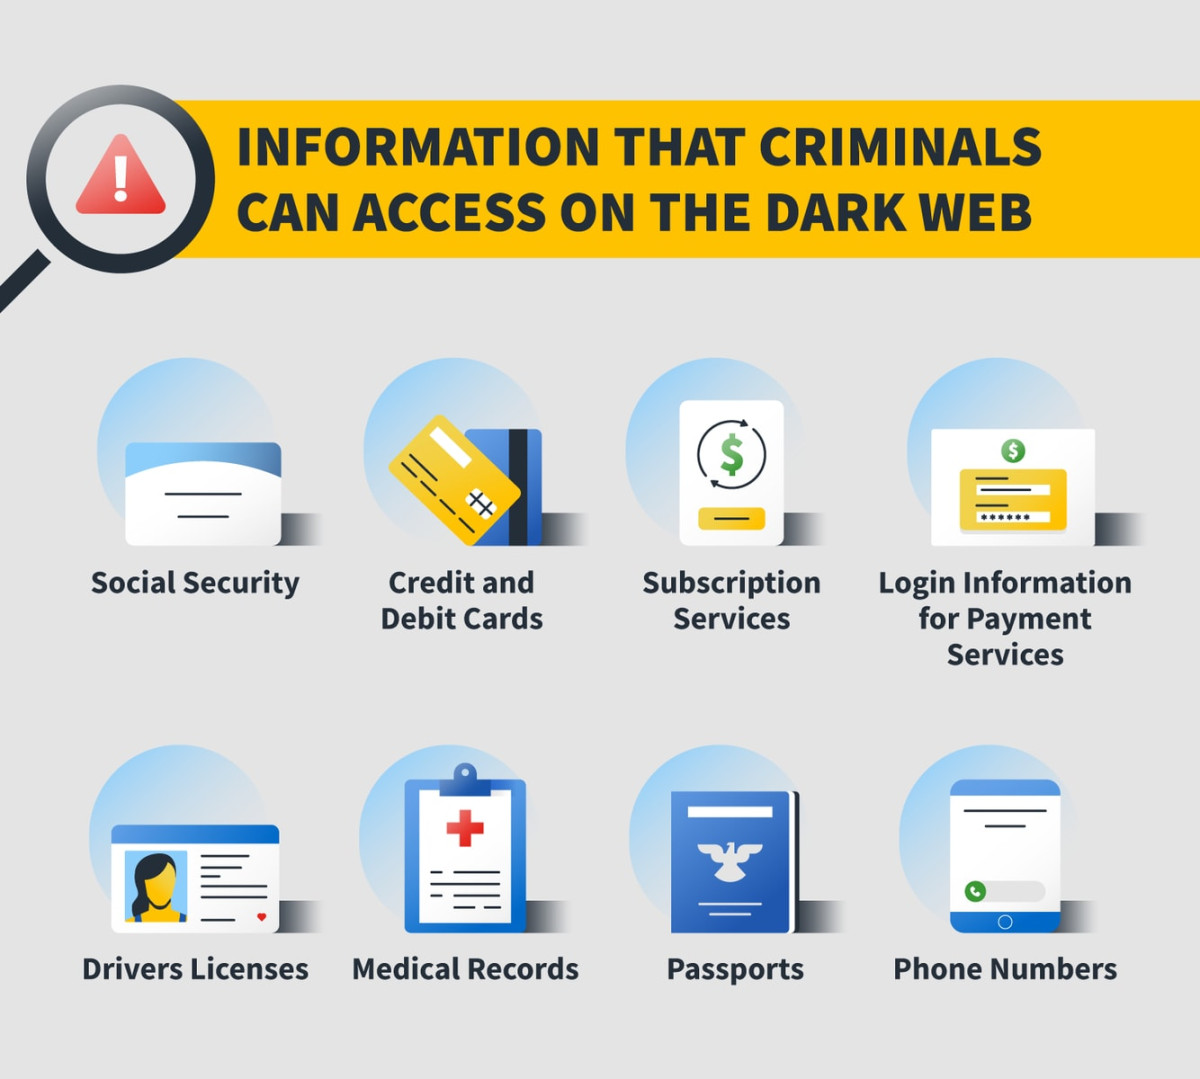 Information that could be accessed on the dark web